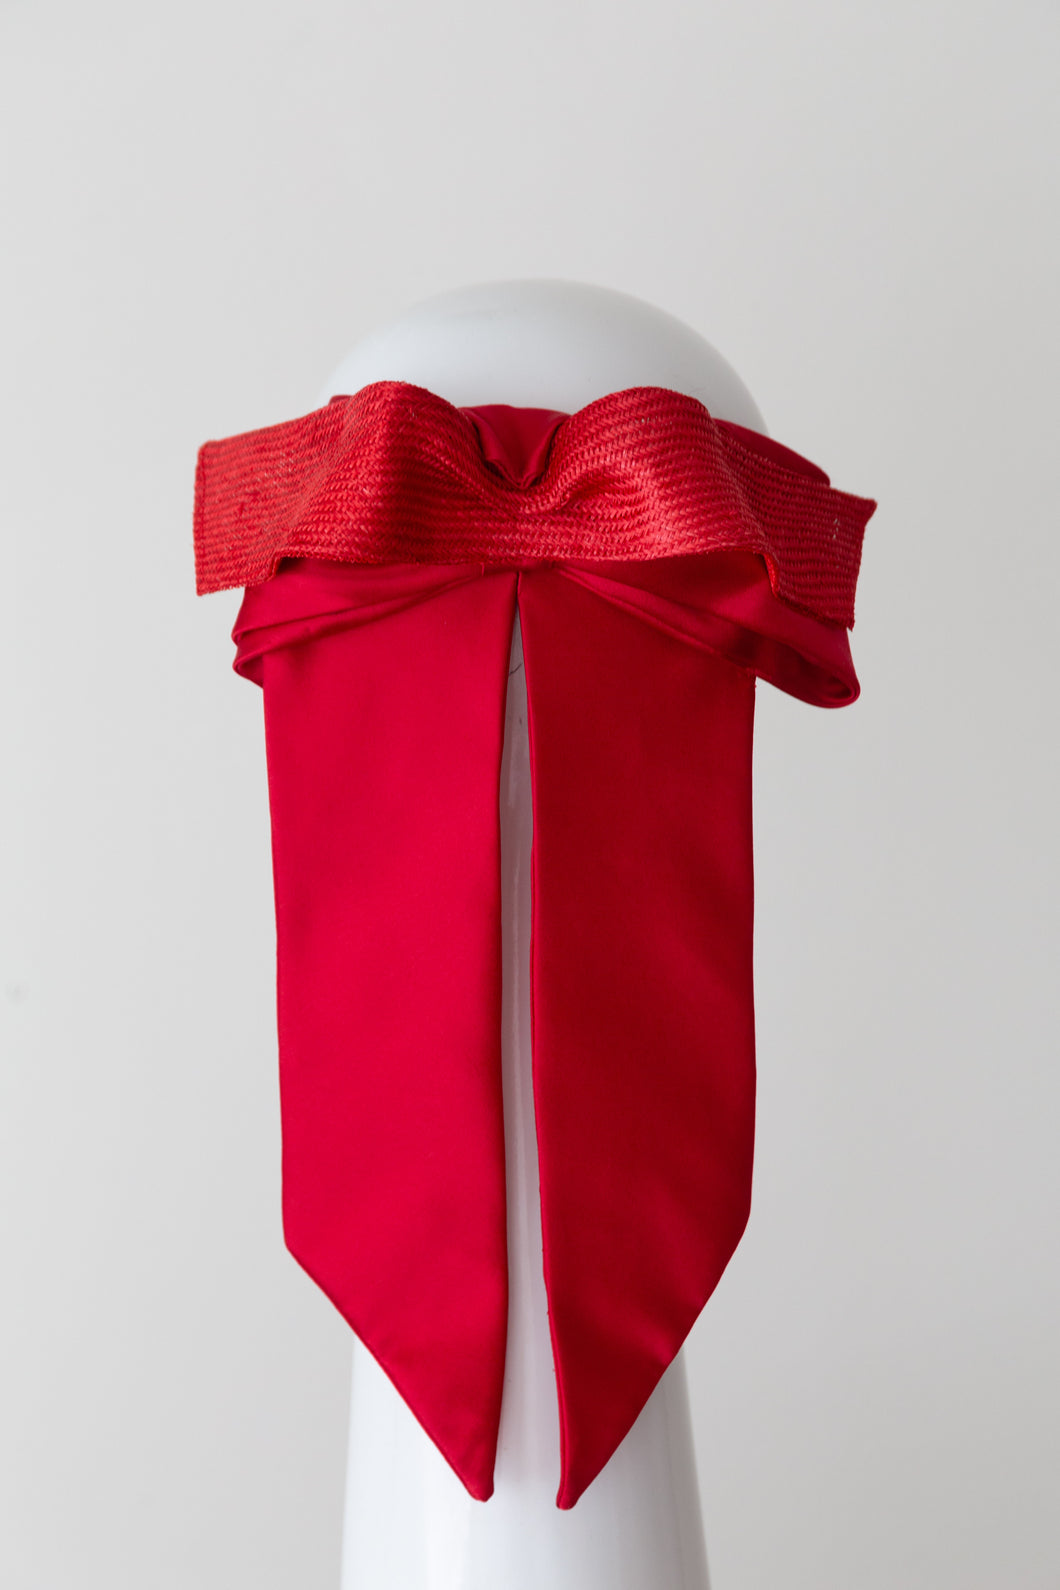 Double Bow in Reds by Felicity Northeast Millinery